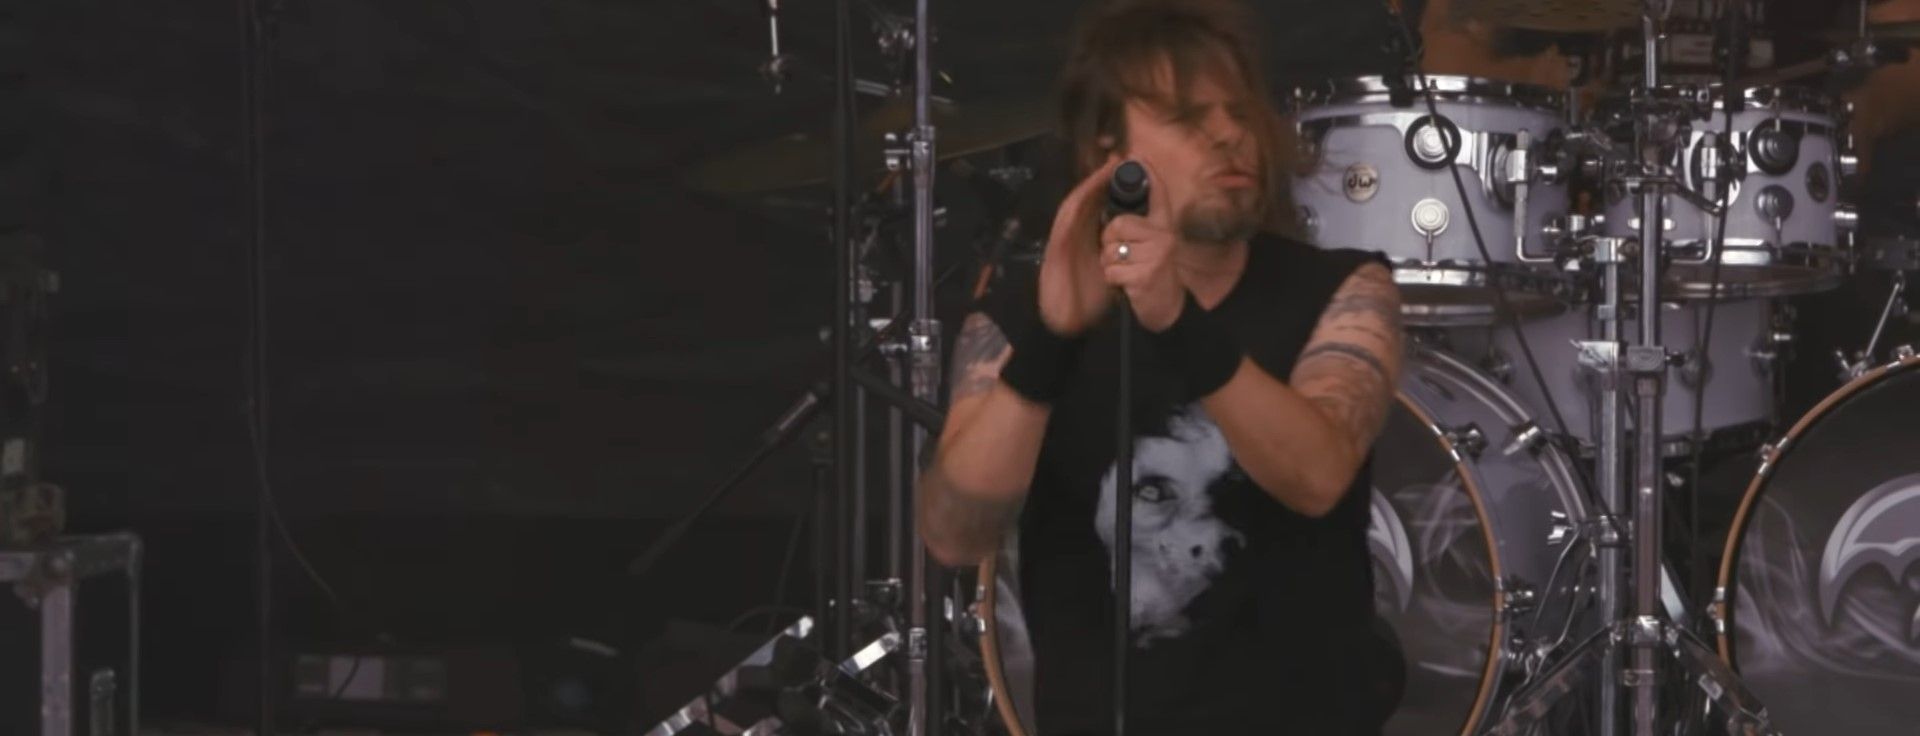 Queensryche - Live At Bloodstock Festival 2019 (Full)